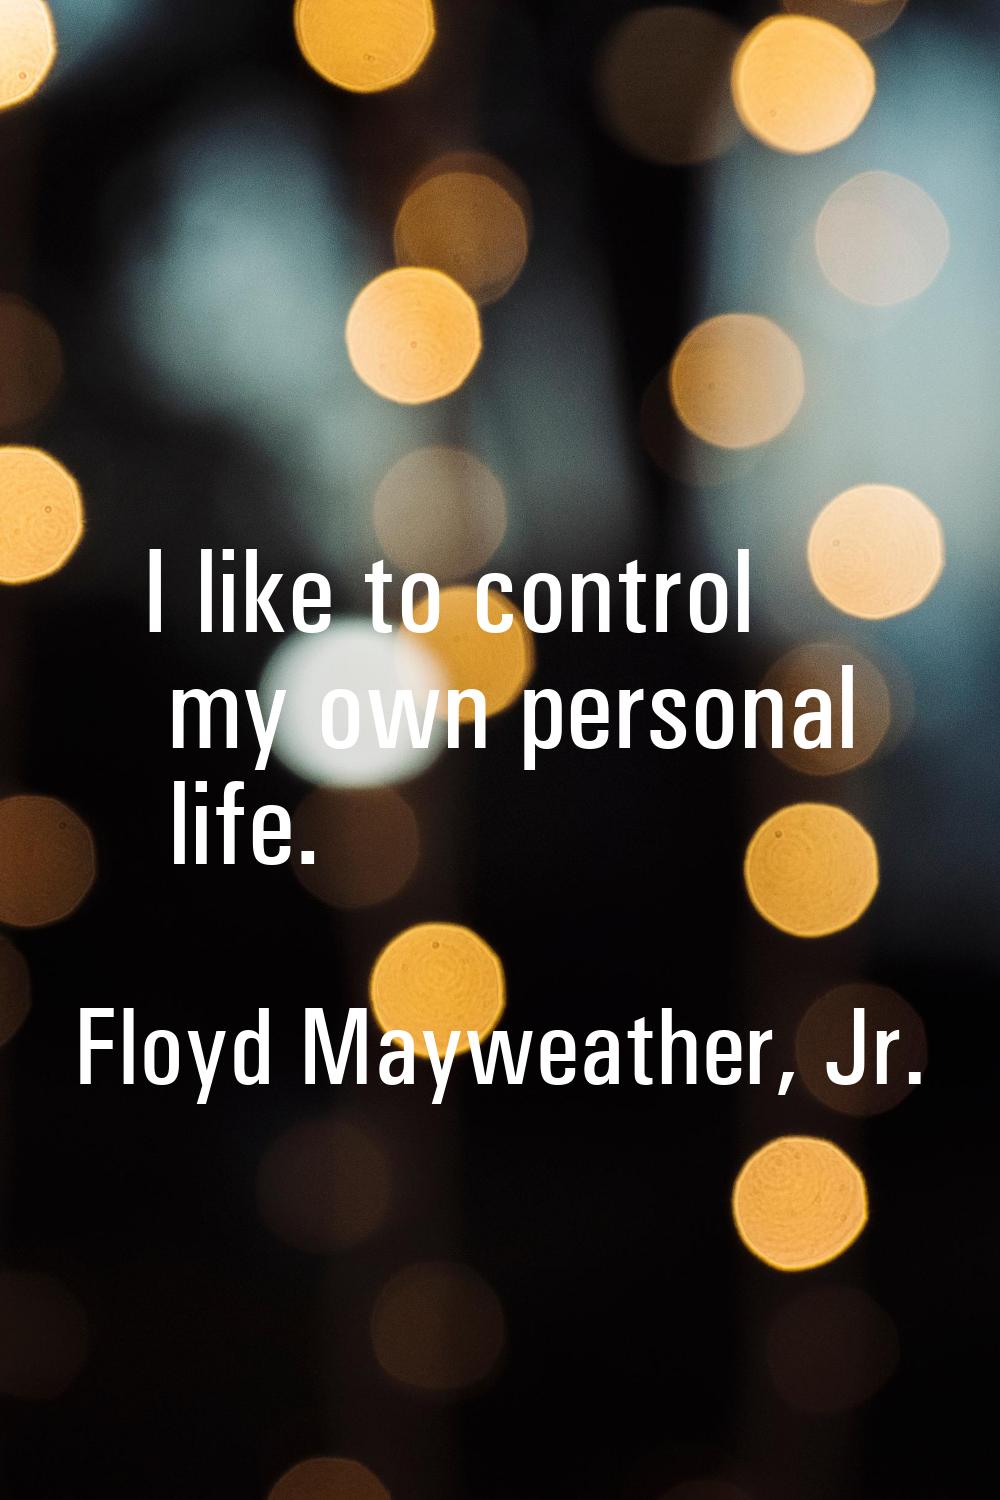 I like to control my own personal life.